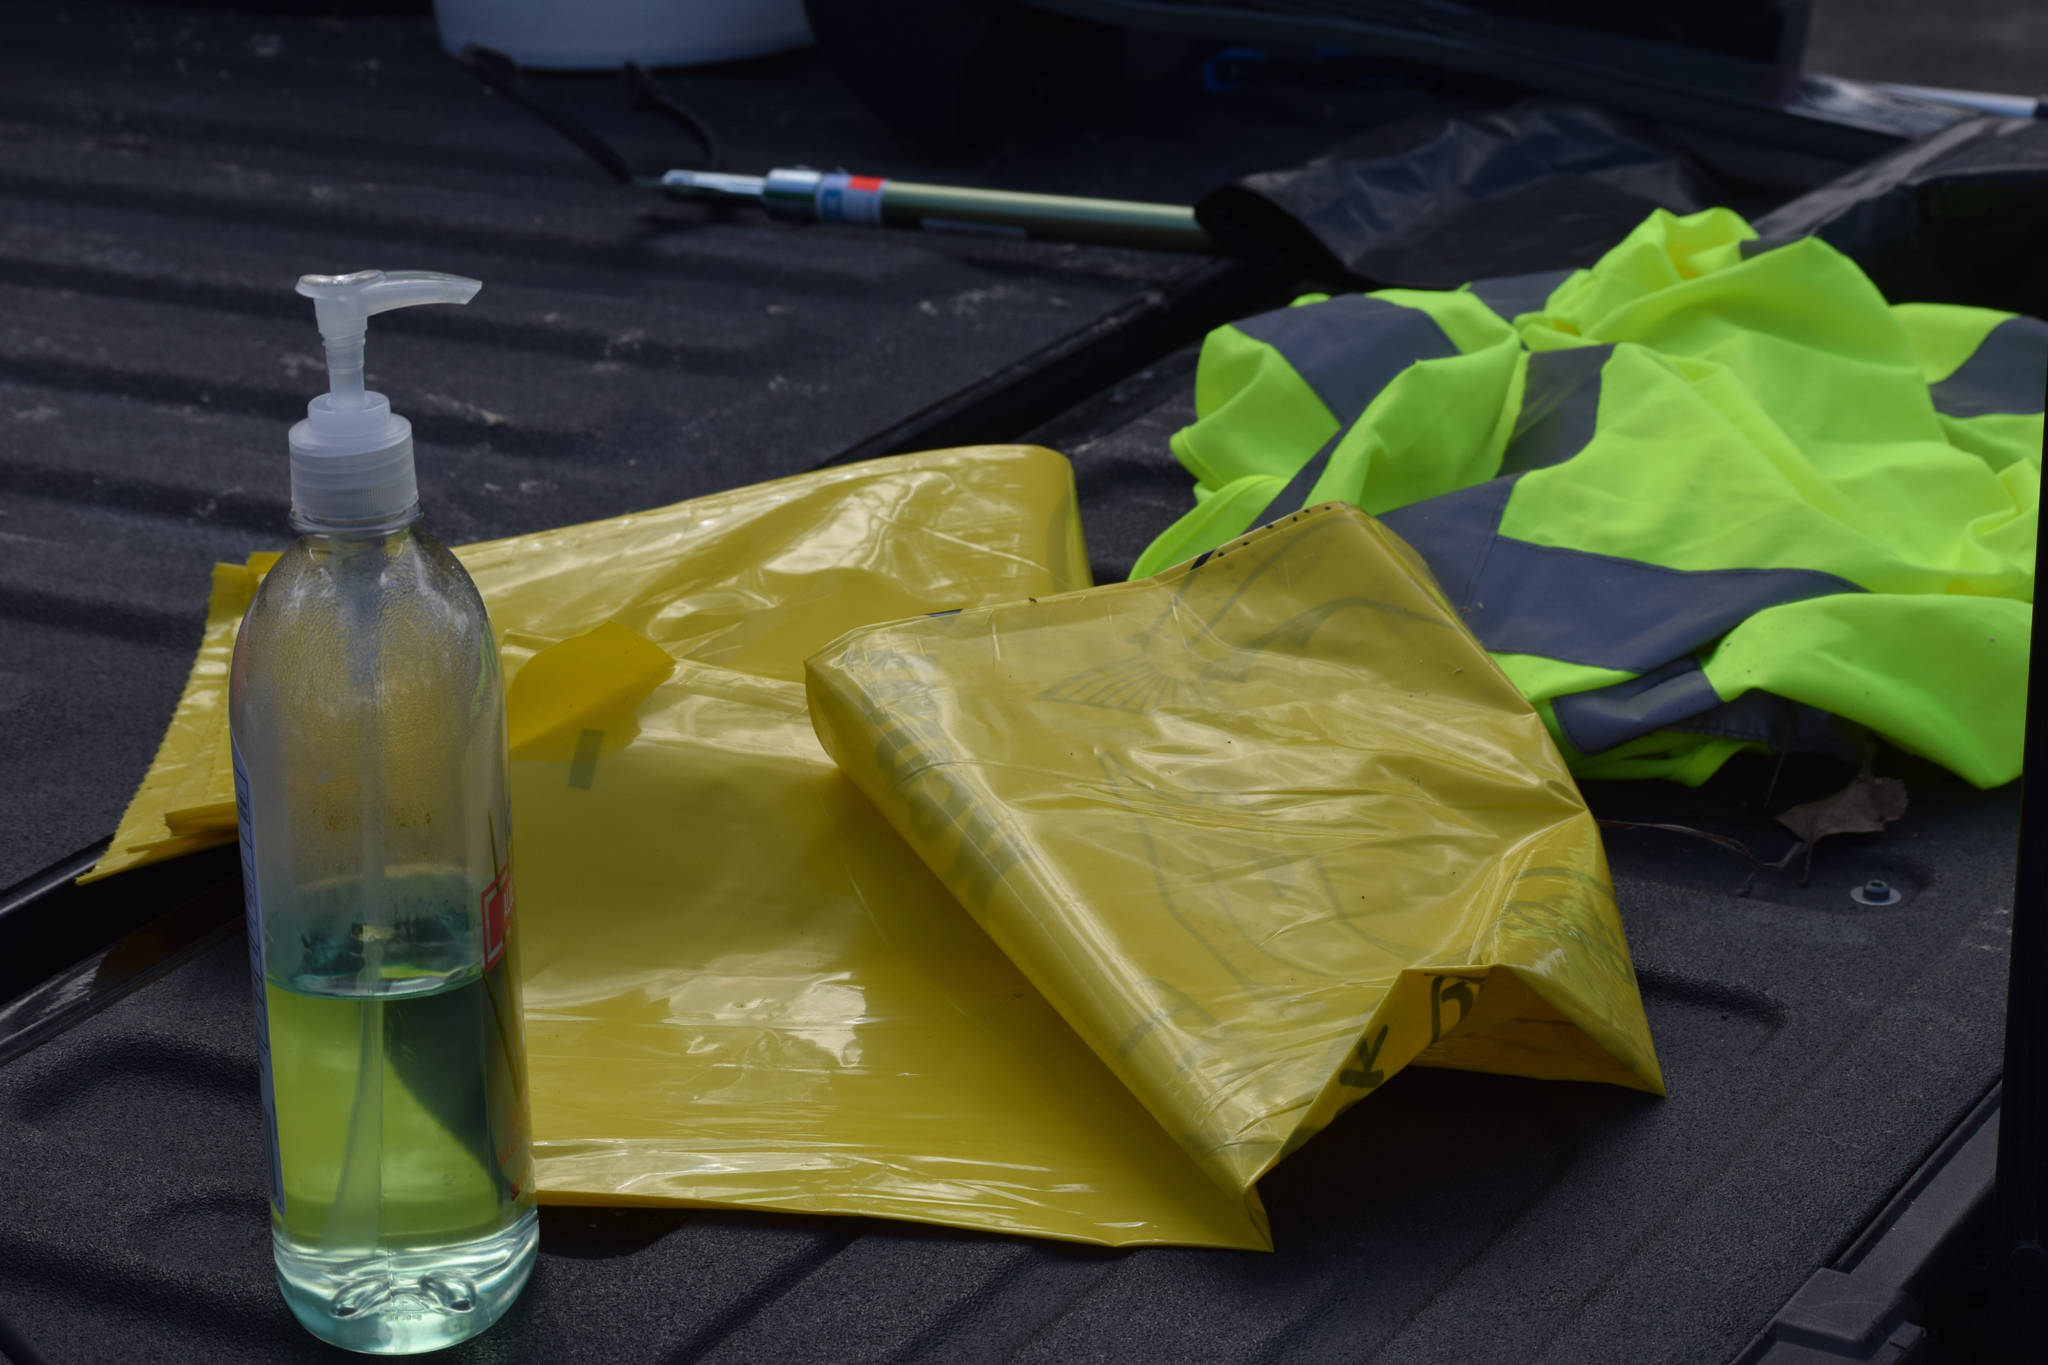 Litter-collecting supplies were distributed to volunteers at the Kenai National Wildlife Refuge in Soldotna, Alaska, on Friday, April 30, 2021. (Camille Botello / Peninsula Clarion)